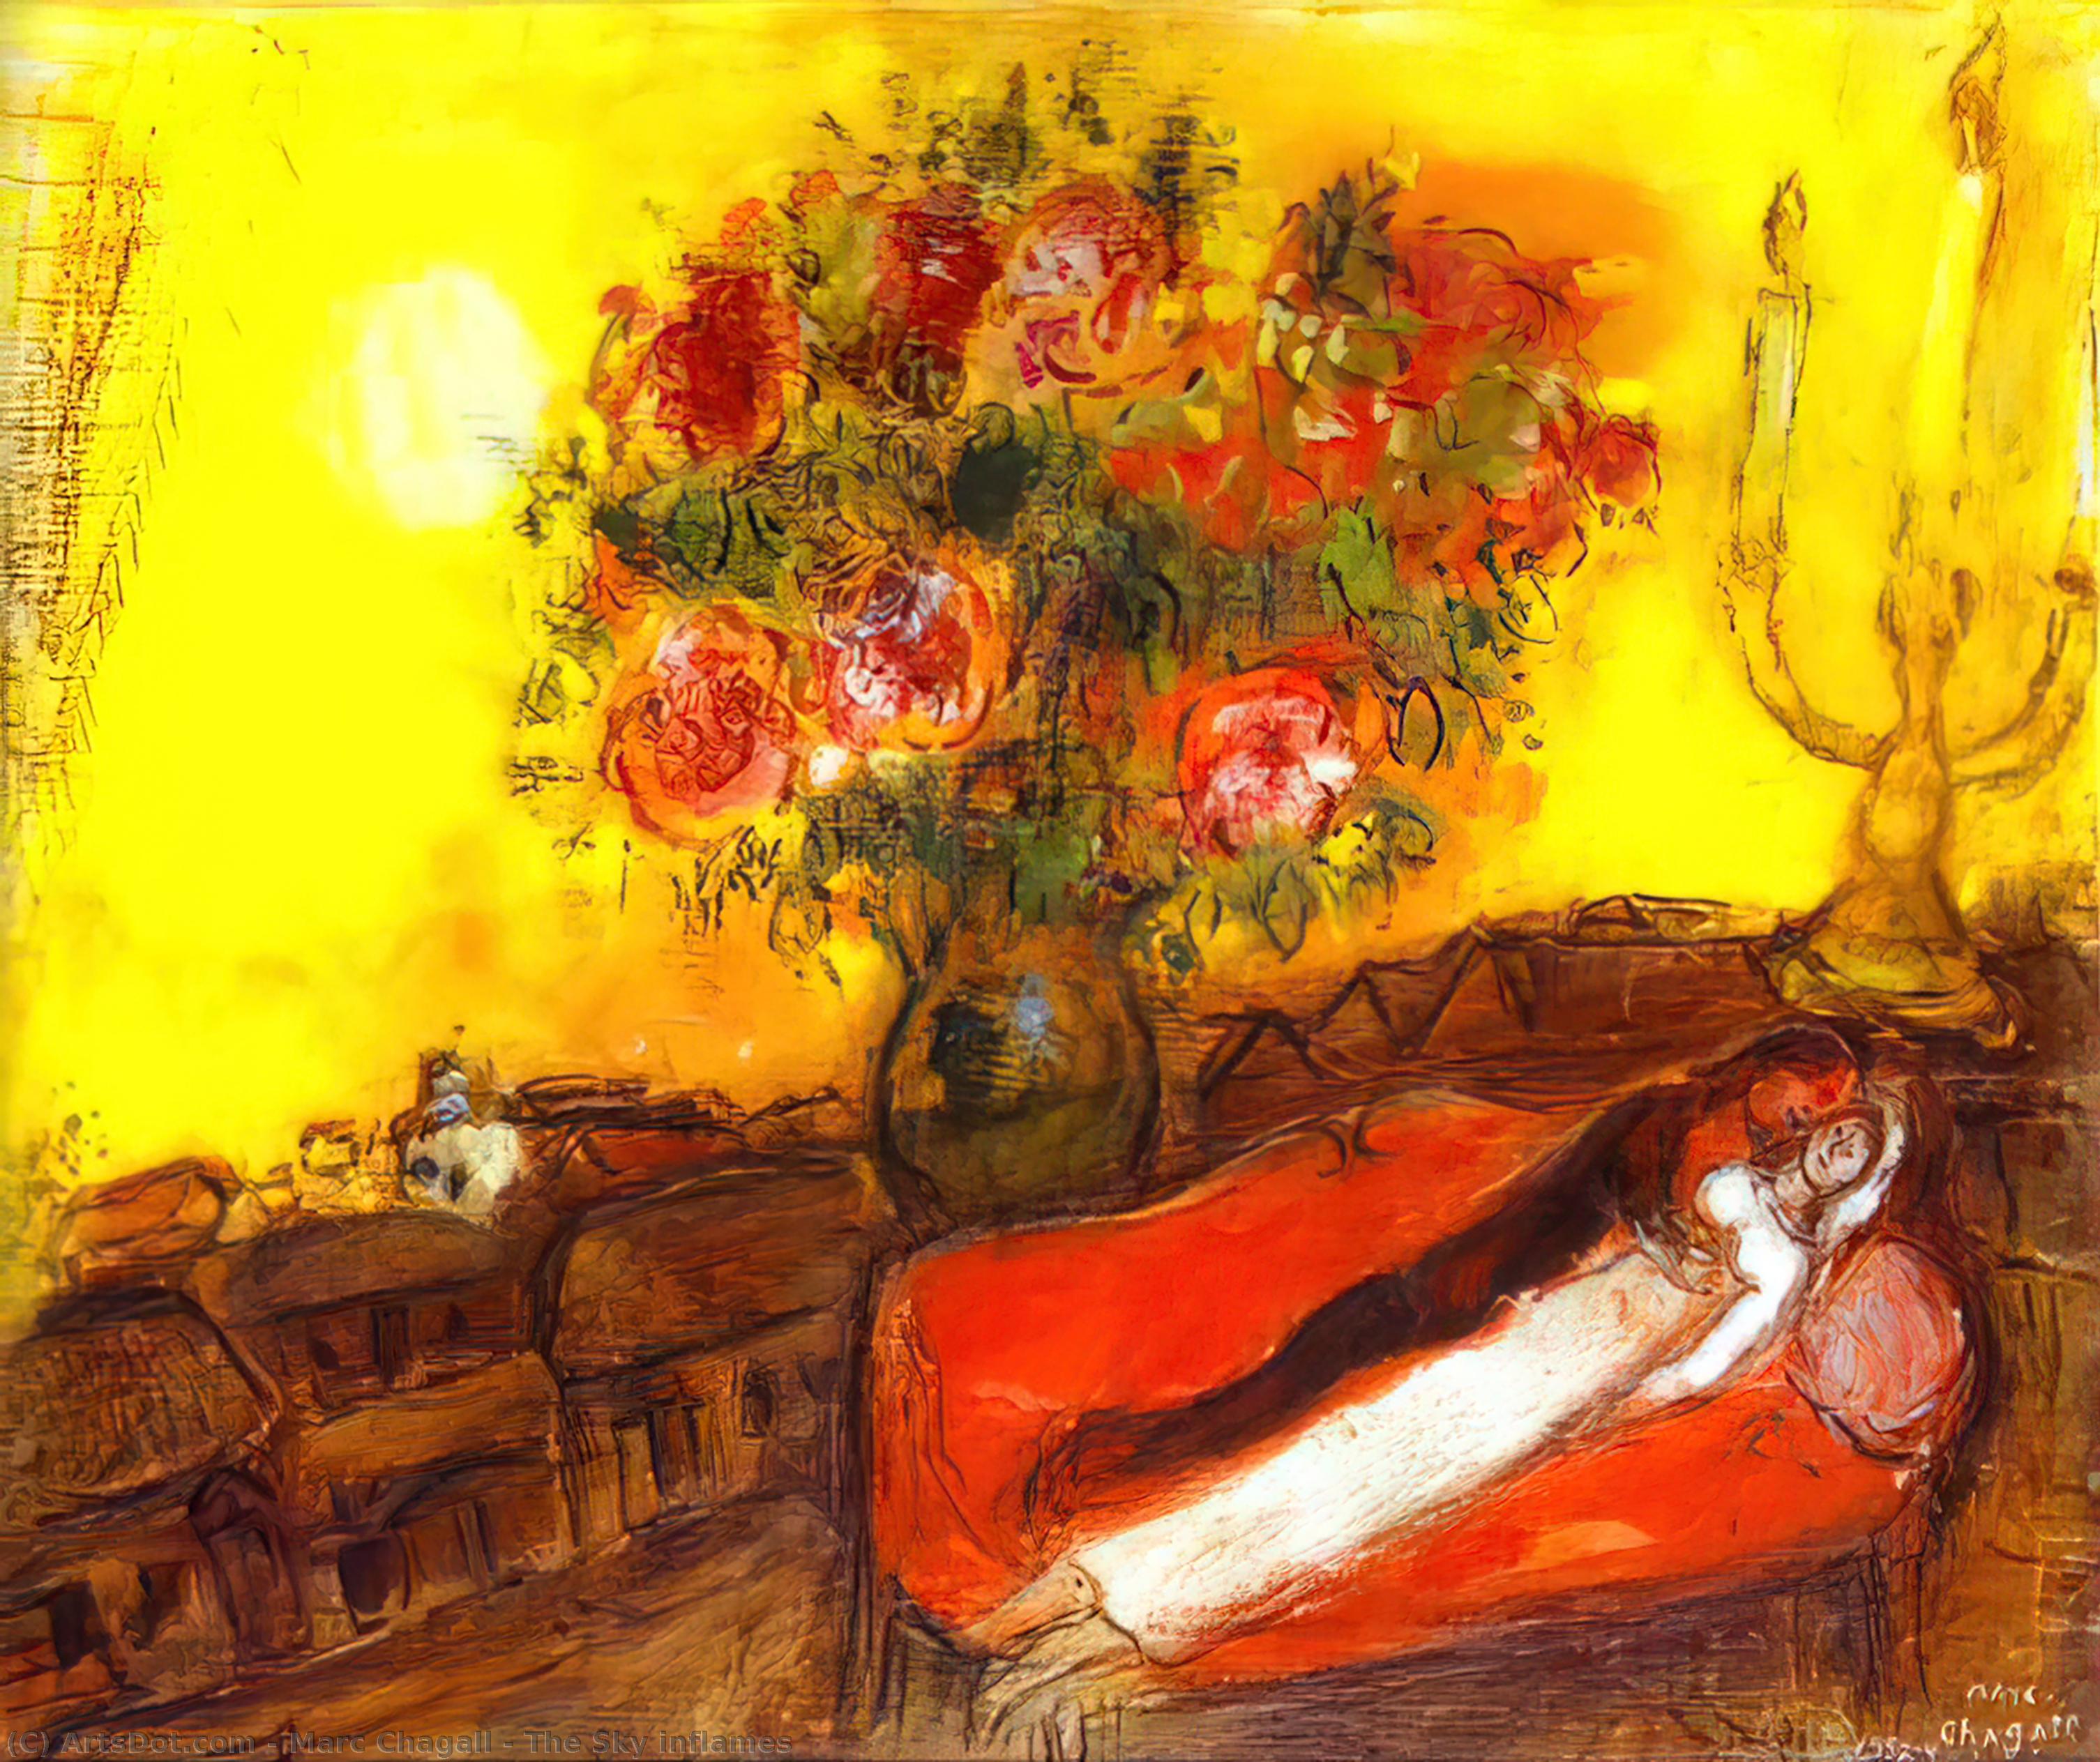 WikiOO.org - 百科事典 - 絵画、アートワーク Marc Chagall - スカイinflames